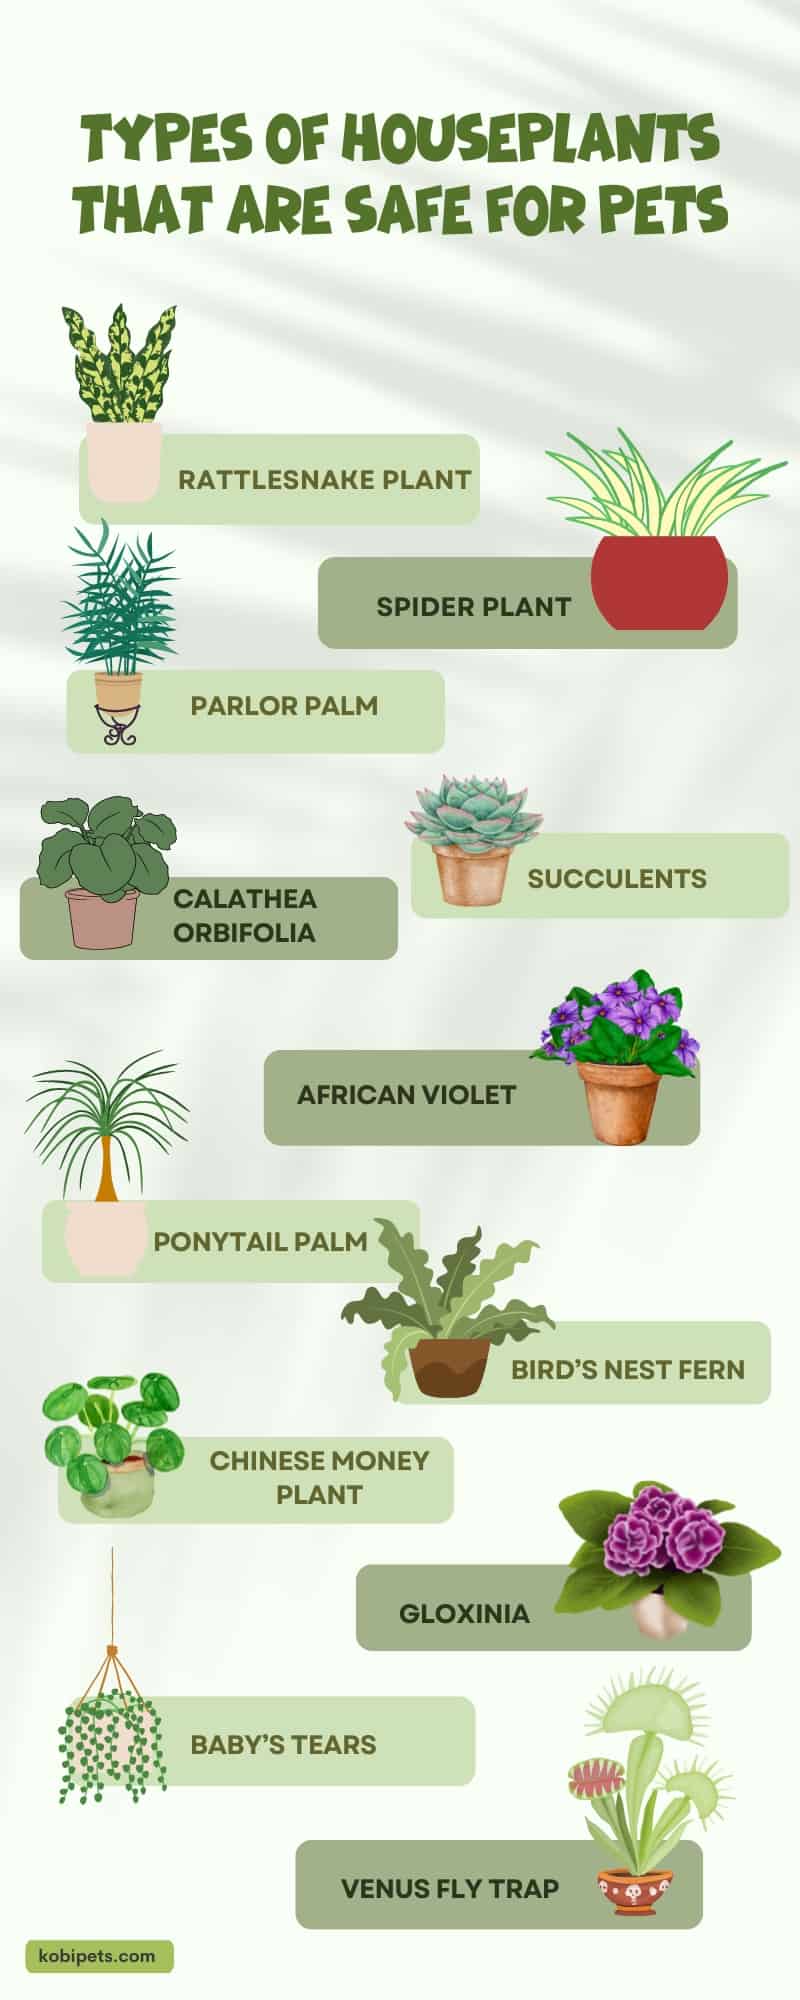 Types of Houseplants That Are Safe for Pets